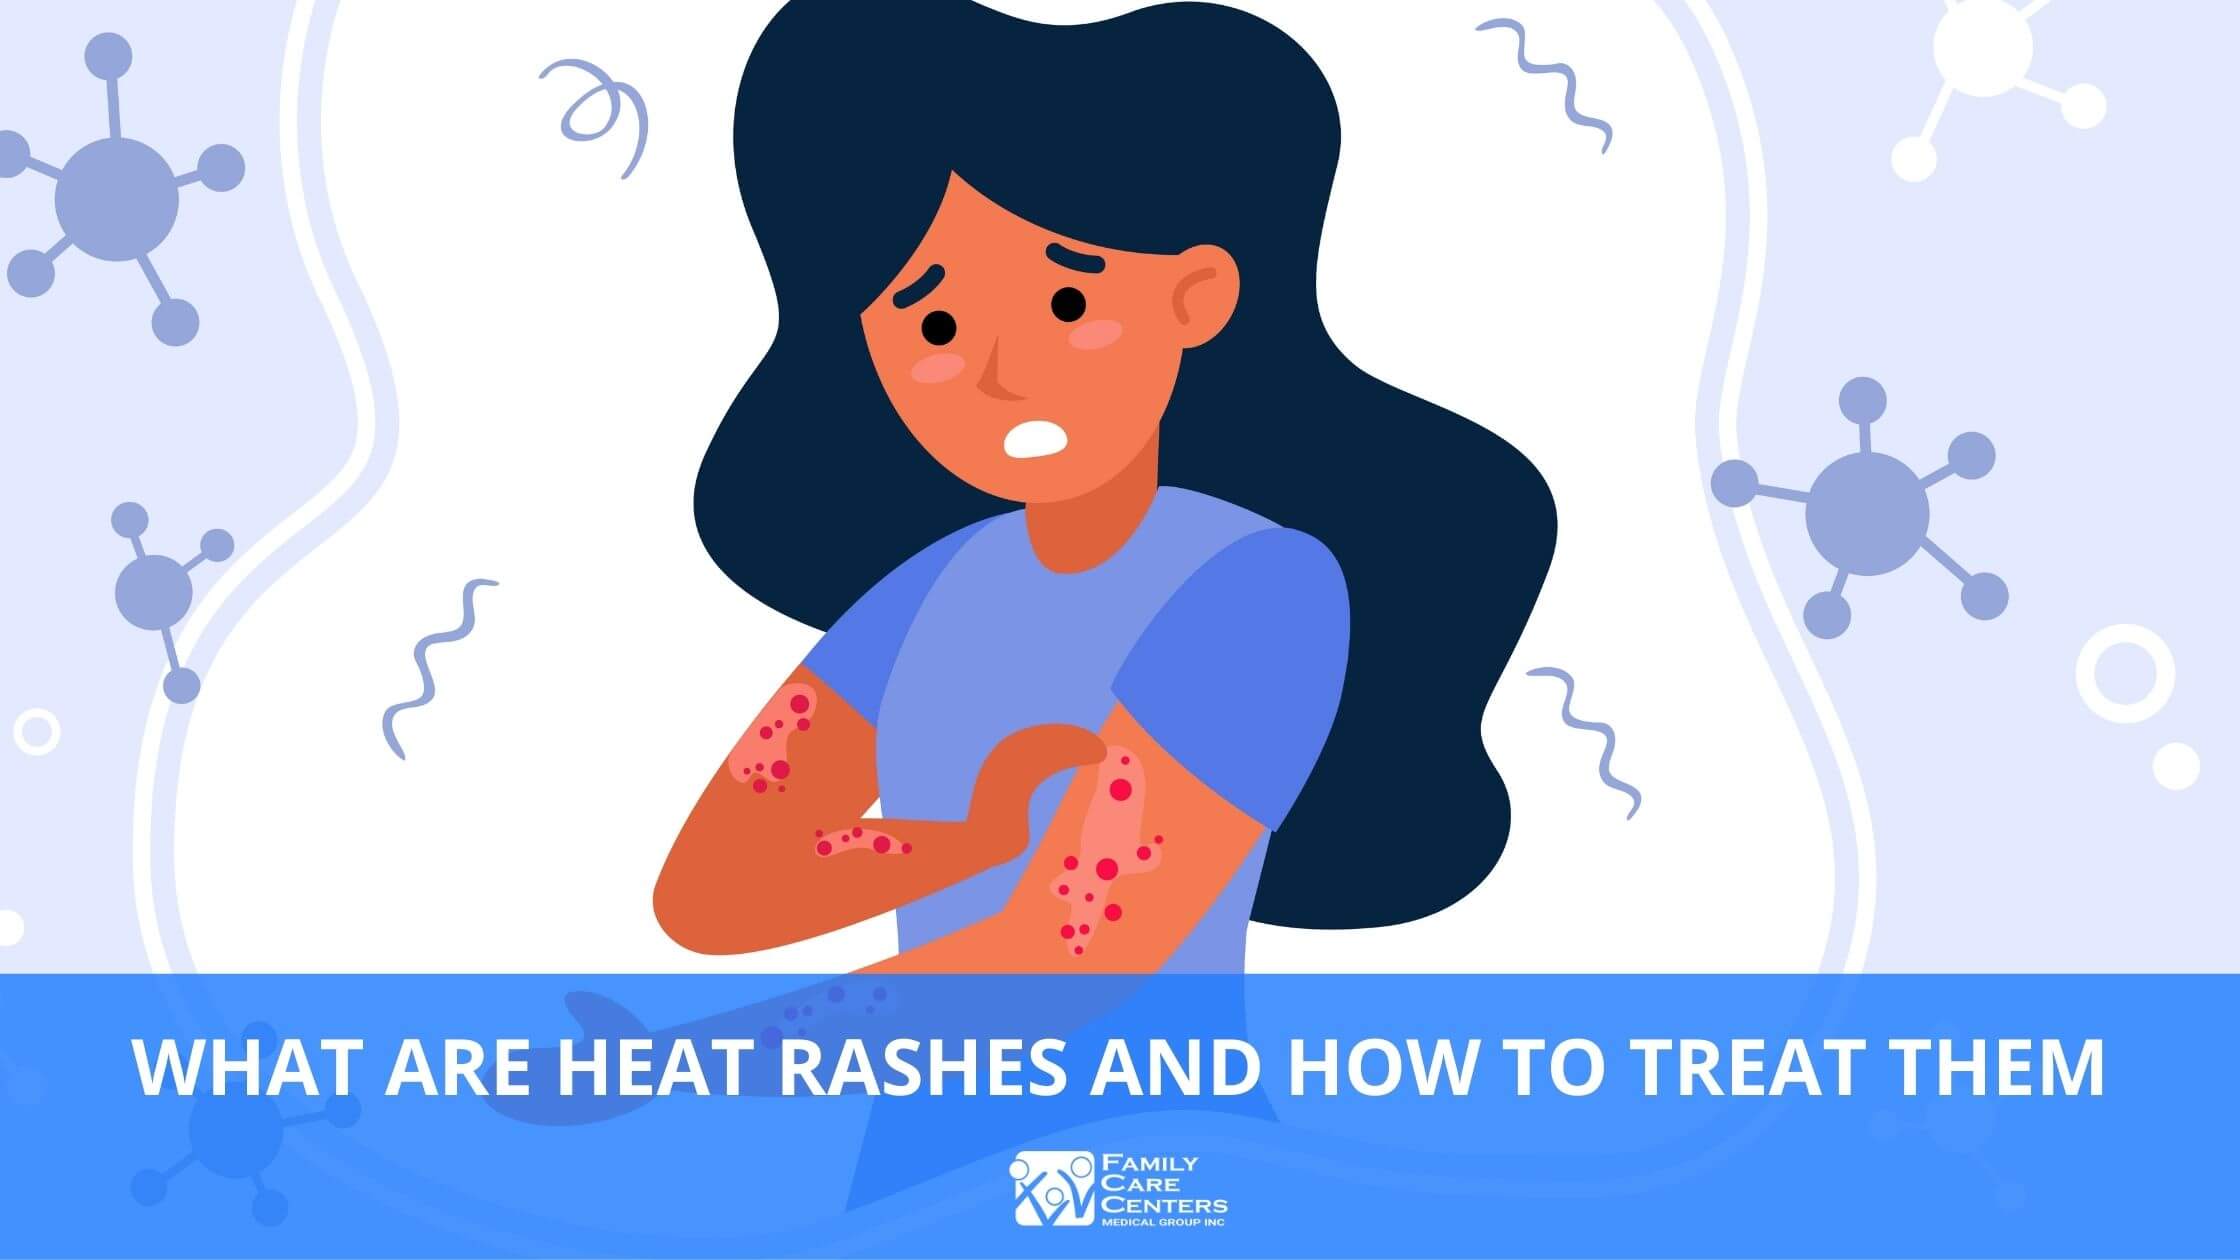 How To Identify, Treat, and Prevent Heat Rash in Children